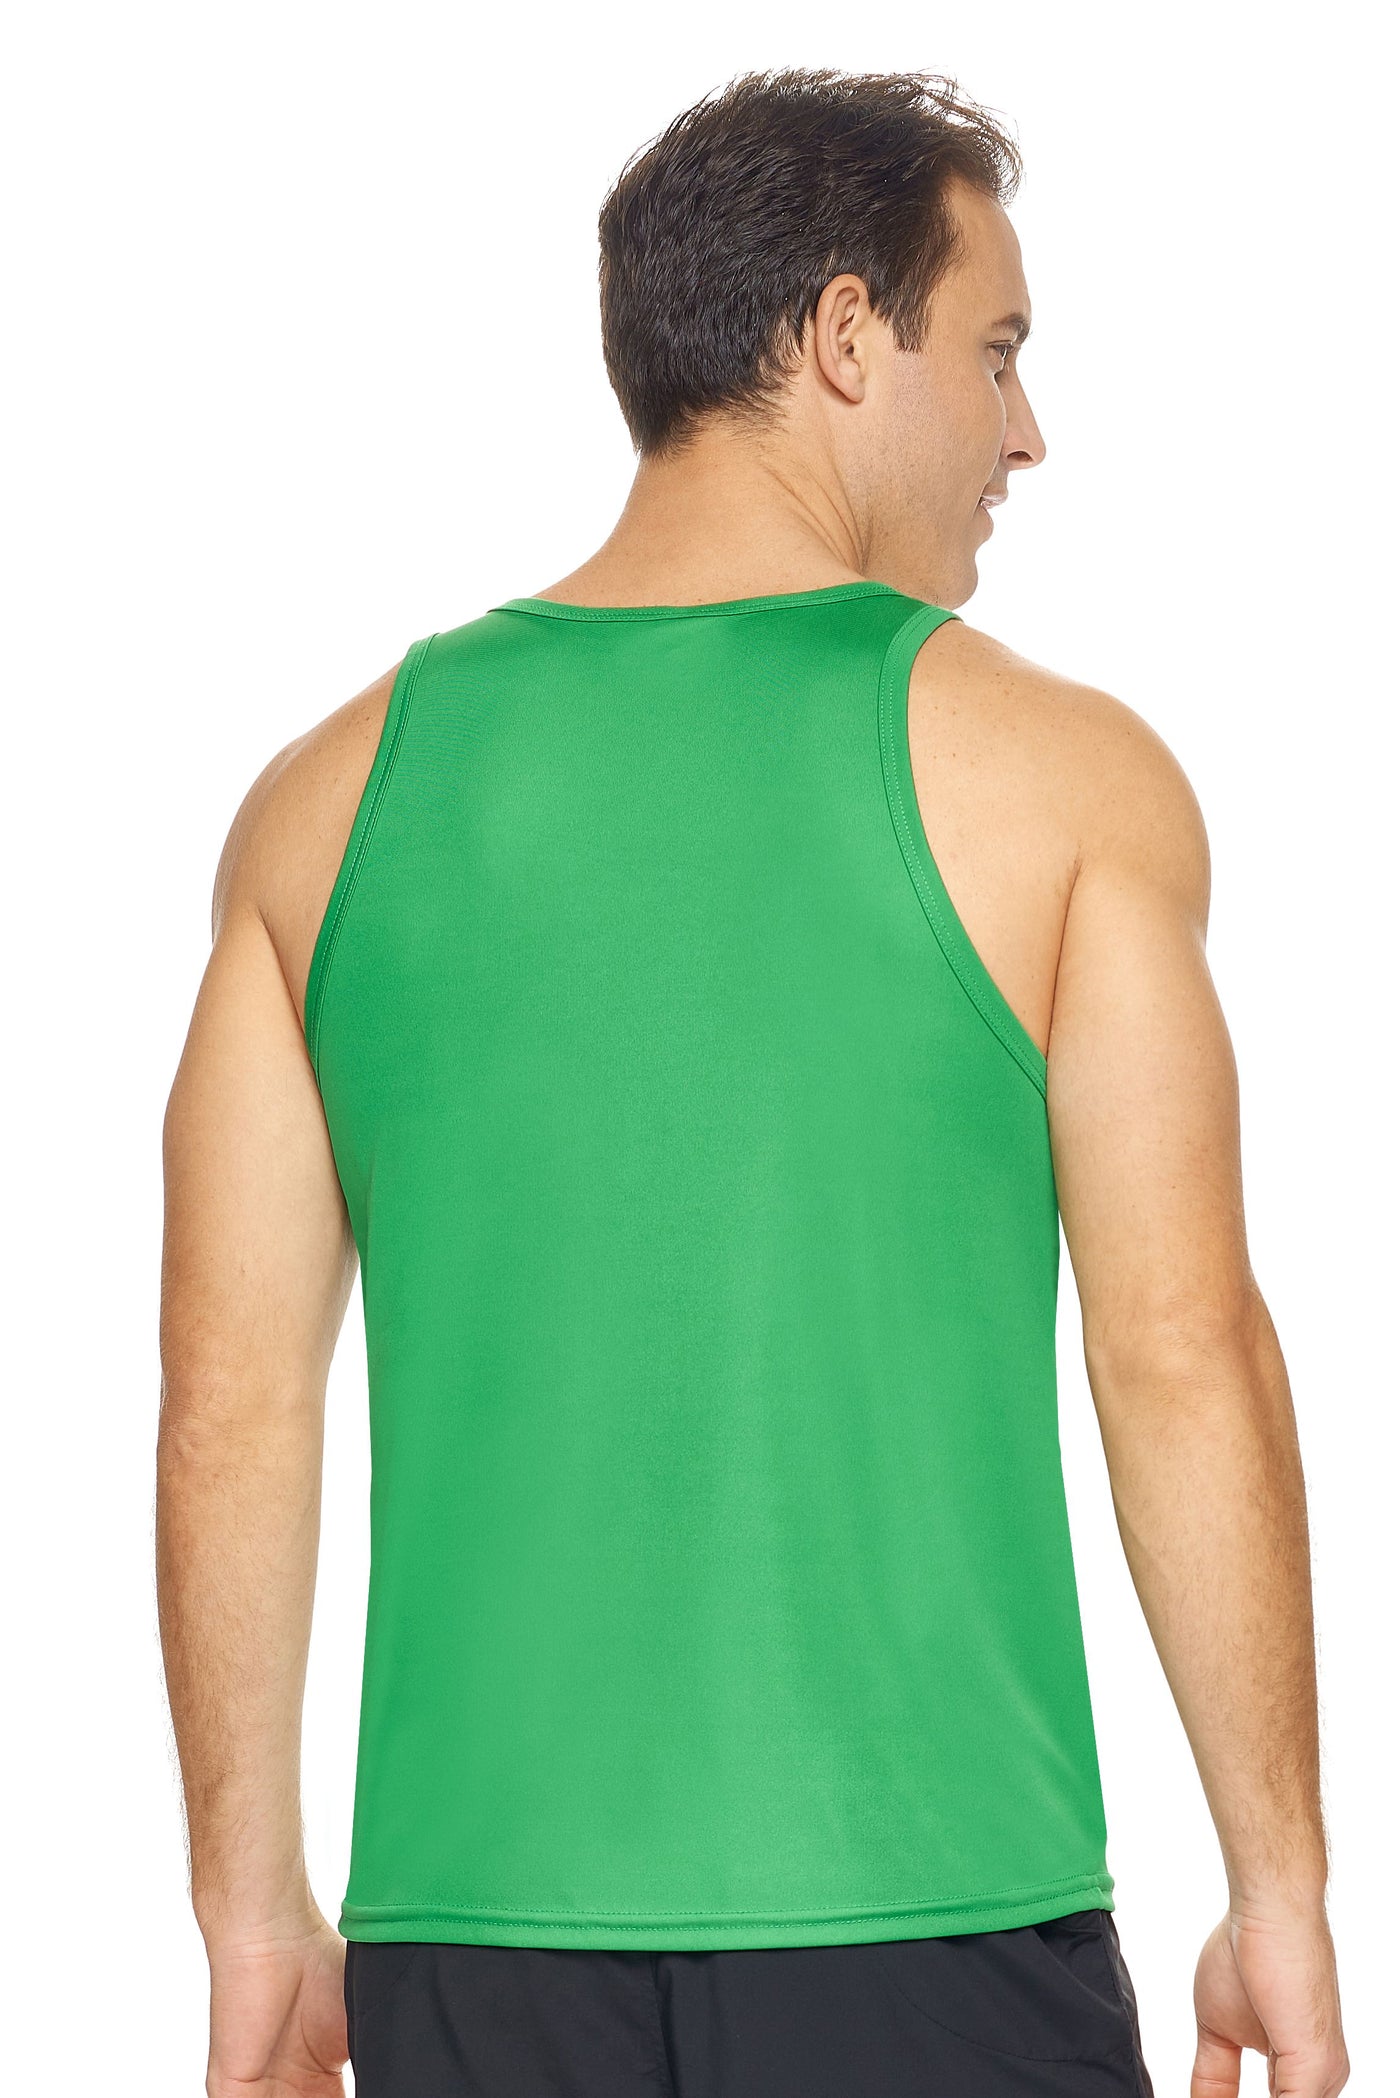 Expert Brand Retail Eco-Friendly Activewear Sportswear Men's pk MaX™ Endurance Sleeveless Tank Made in USA kelly green 3#color_kelly-green